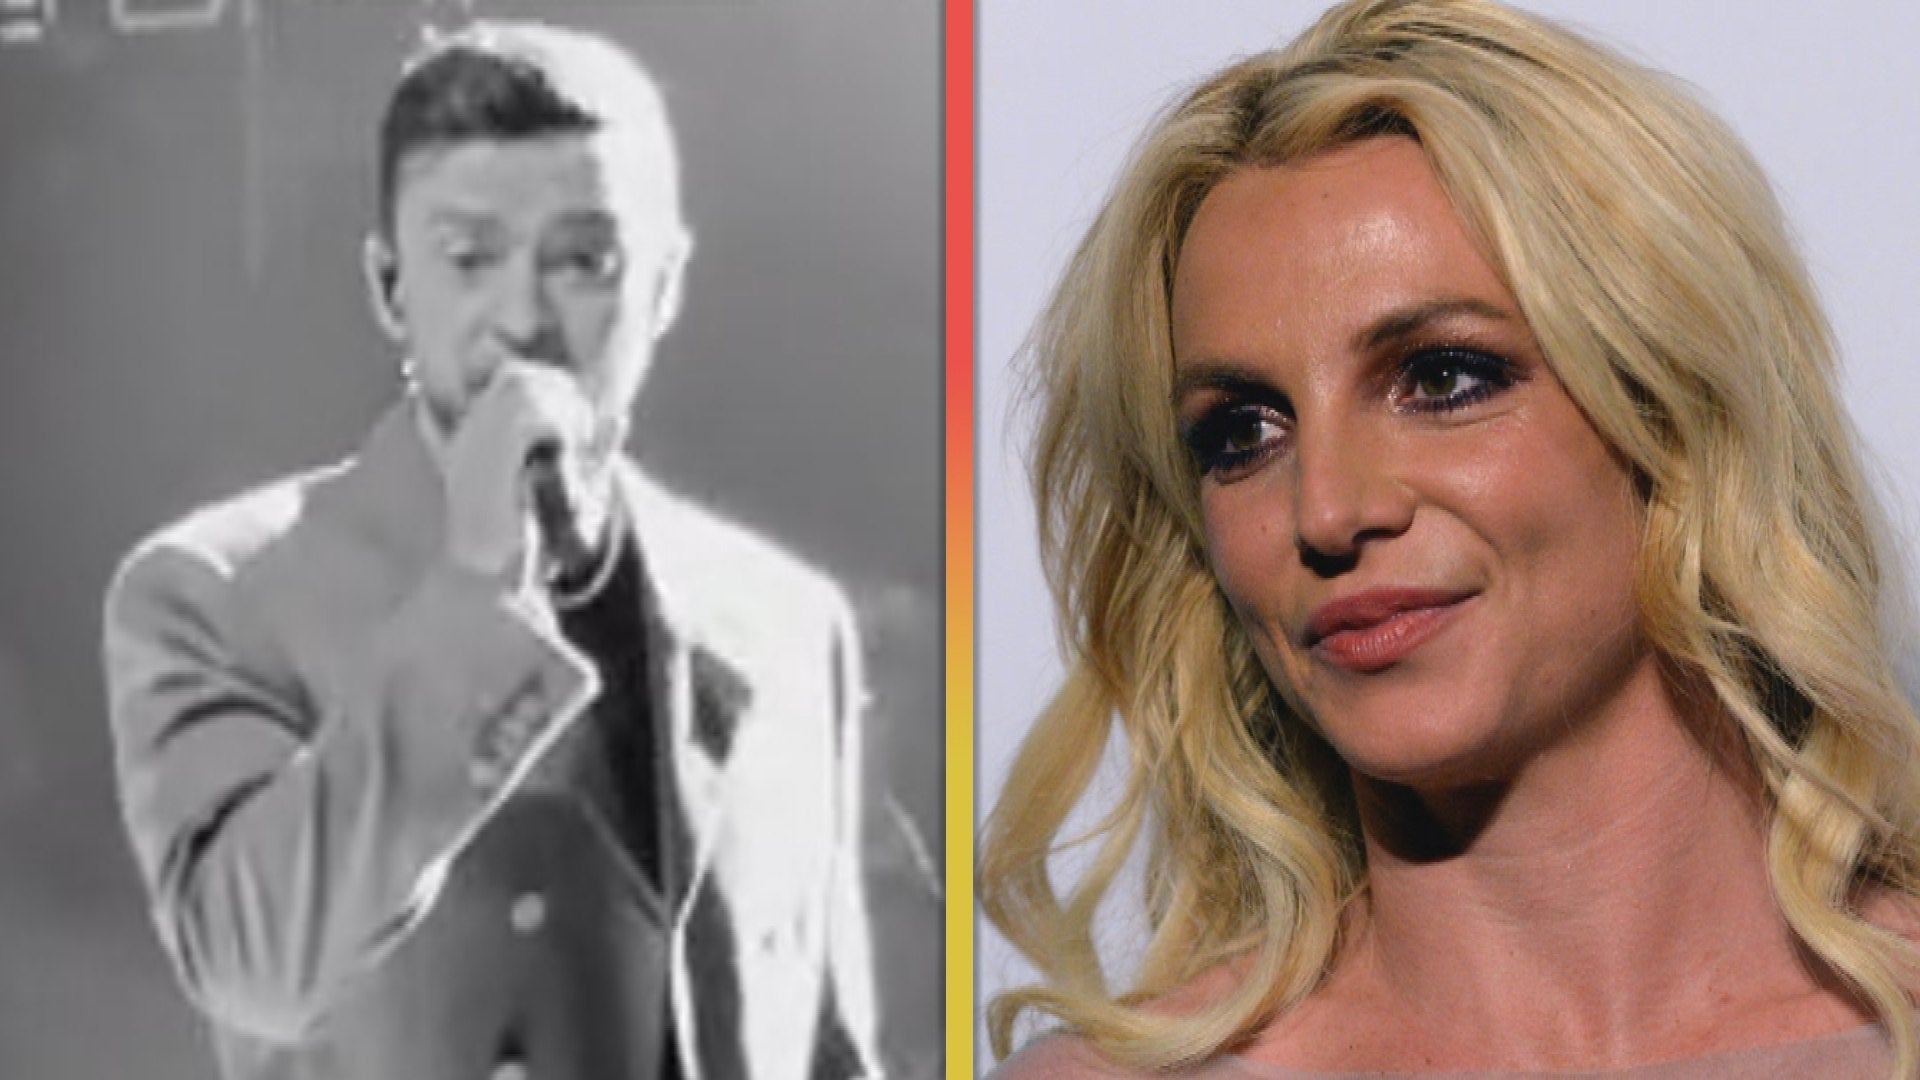 Britney Spears Responds After Justin Timberlake Seemingly Shades Her at NYC Concert